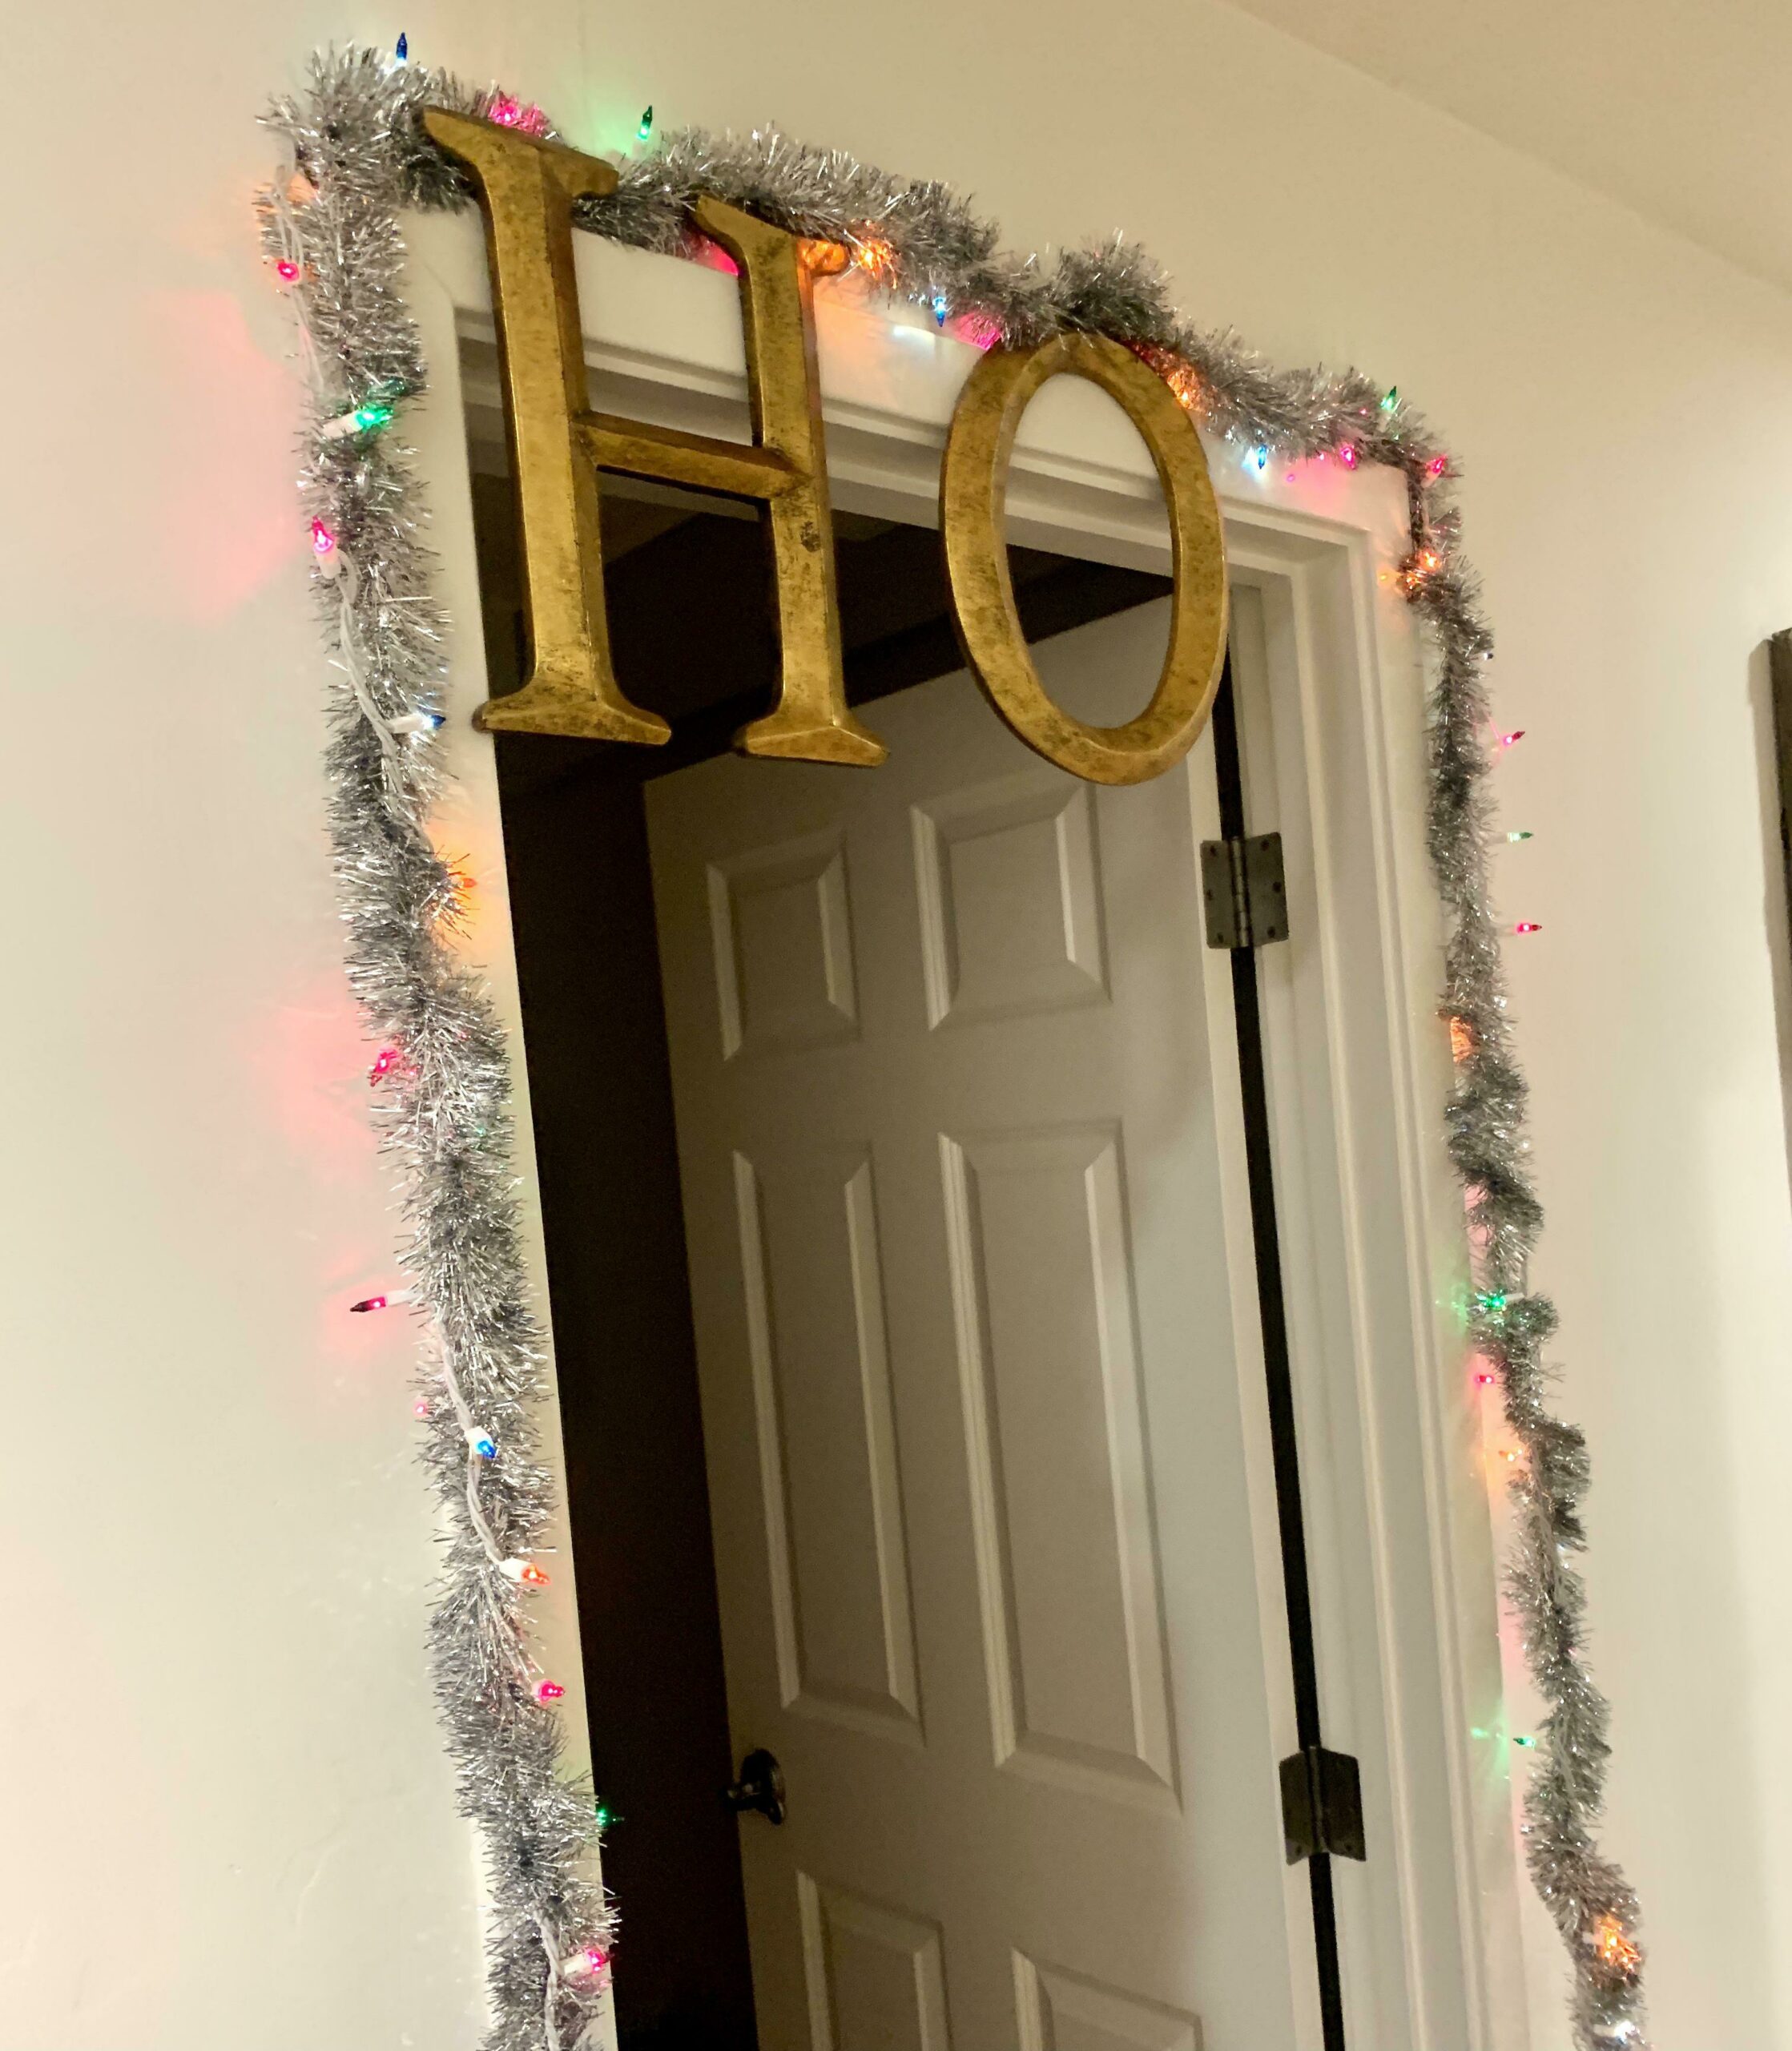 I Decided To Decorate My Sister's Room Before She Comes Home For The Holidays. I Hope She Likes It!!